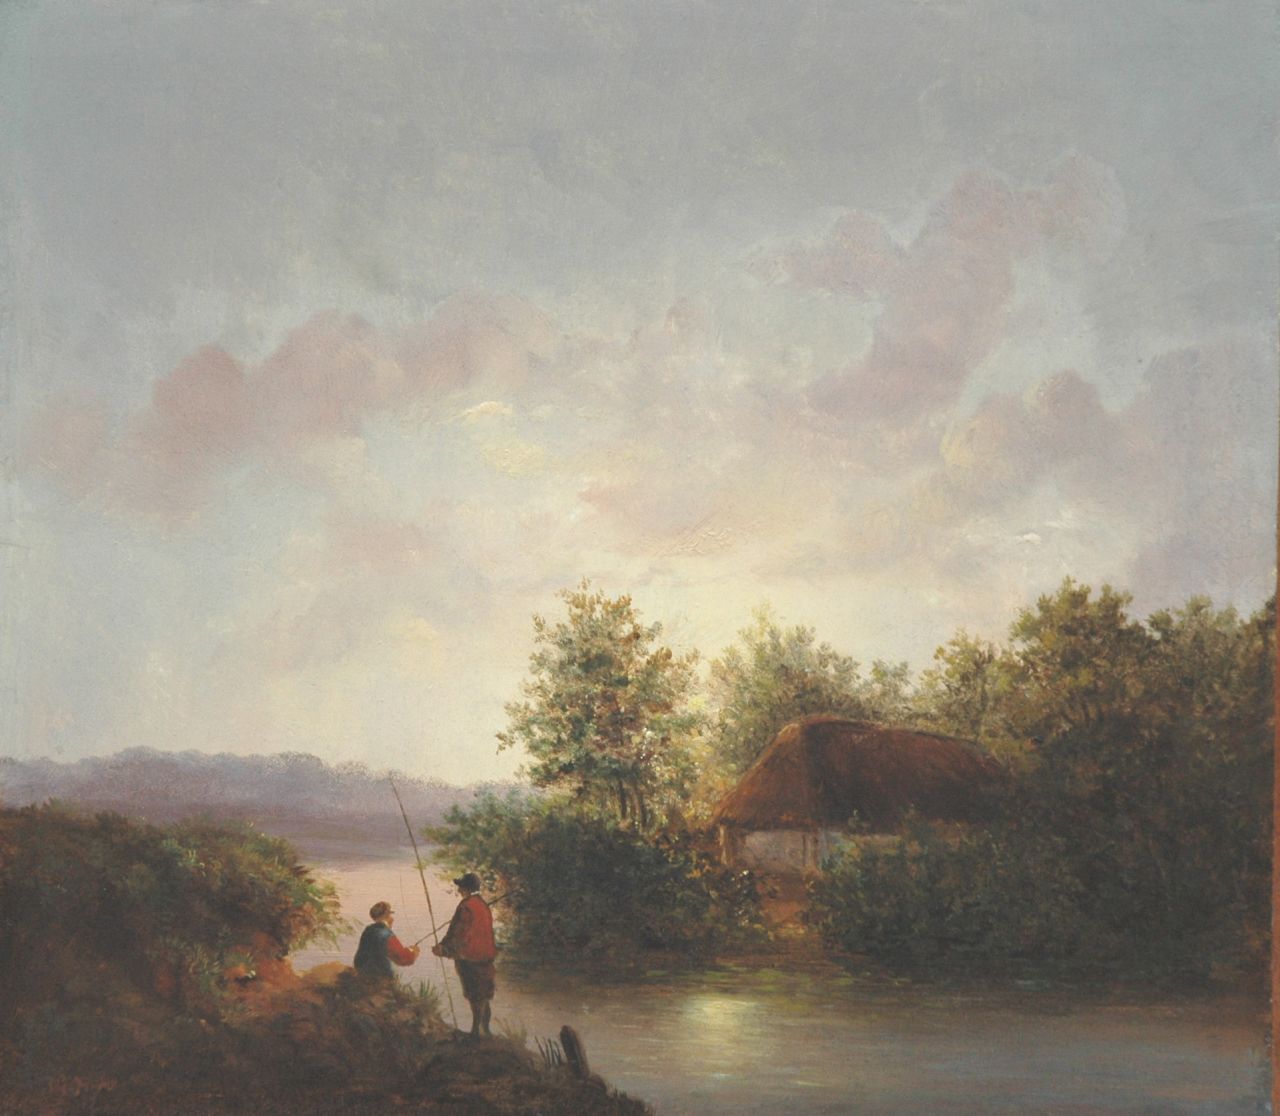 Hans J.G.  | Josephus Gerardus Hans, Anglers in a river landscape by sunset, oil on panel 27.1 x 31.1 cm, signed l.l. and dated '47